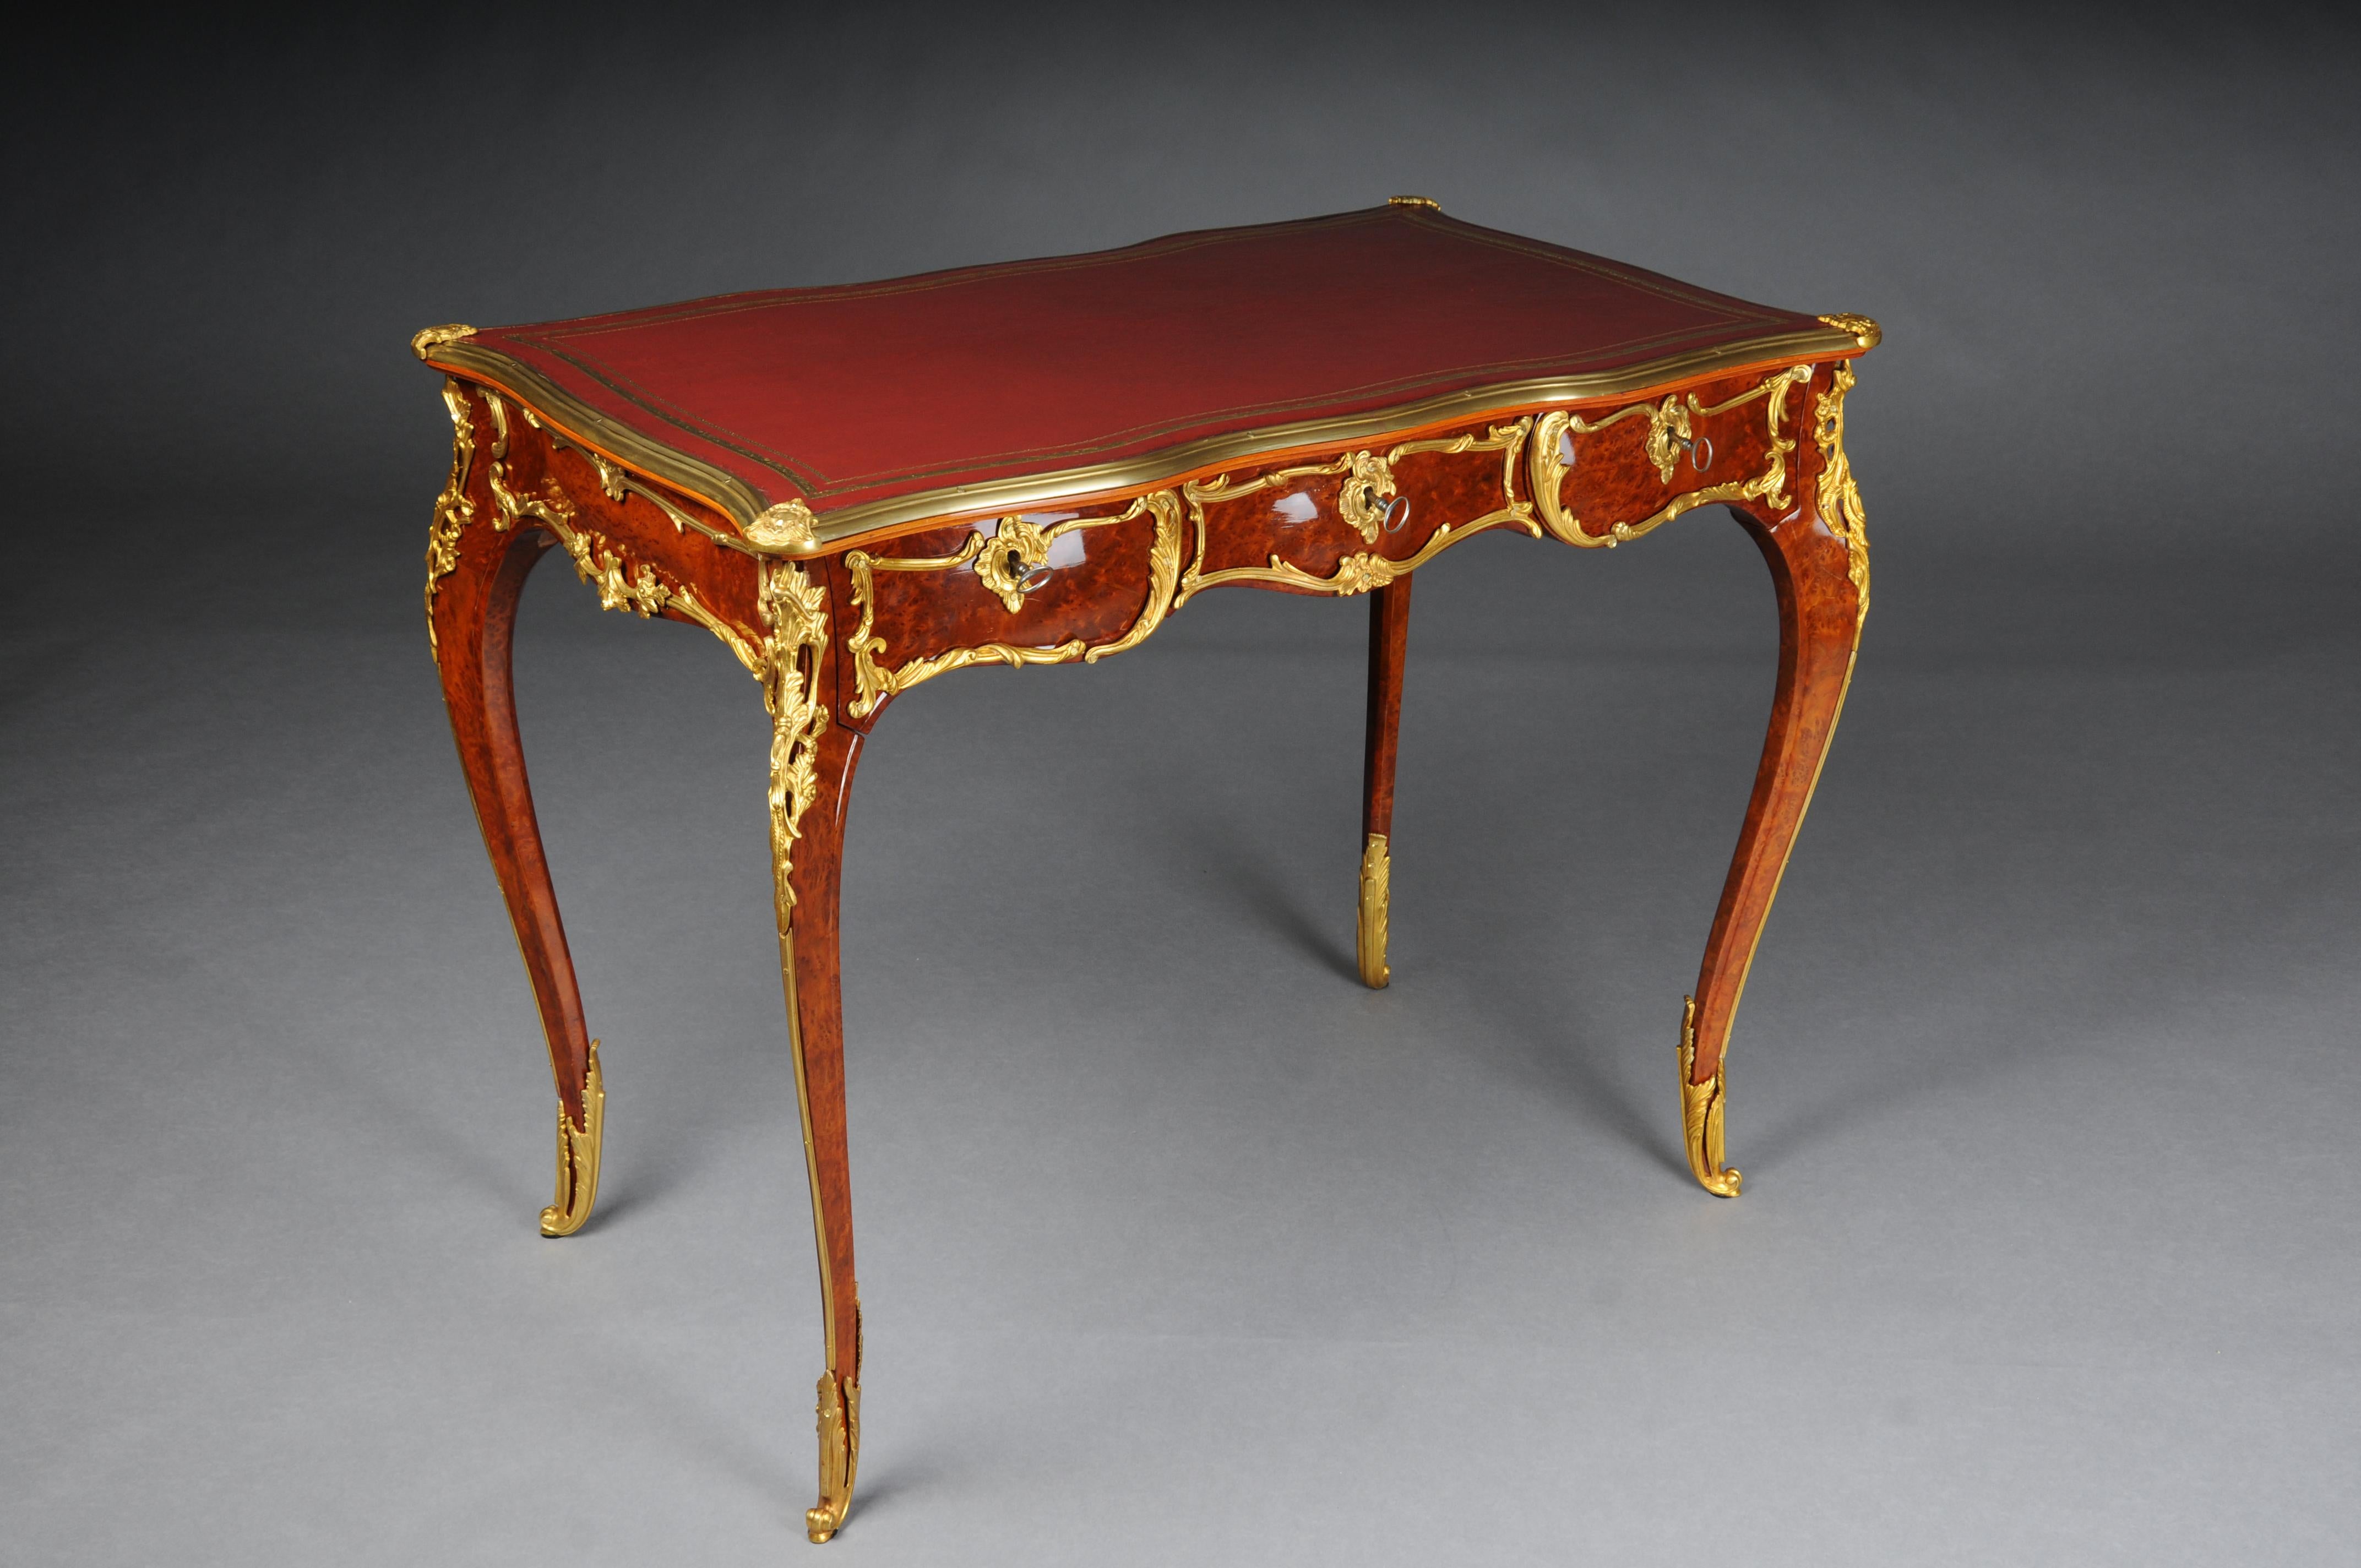 Elegant veneered bureau plat / desk in Louis XV style

Solid beech wood and veneer. Very fine, floral bronze fittings.
Curved and pronounced / arched wooden body. Frame base with four-sided curvature.
3 drawers and wide knee compartment ending on